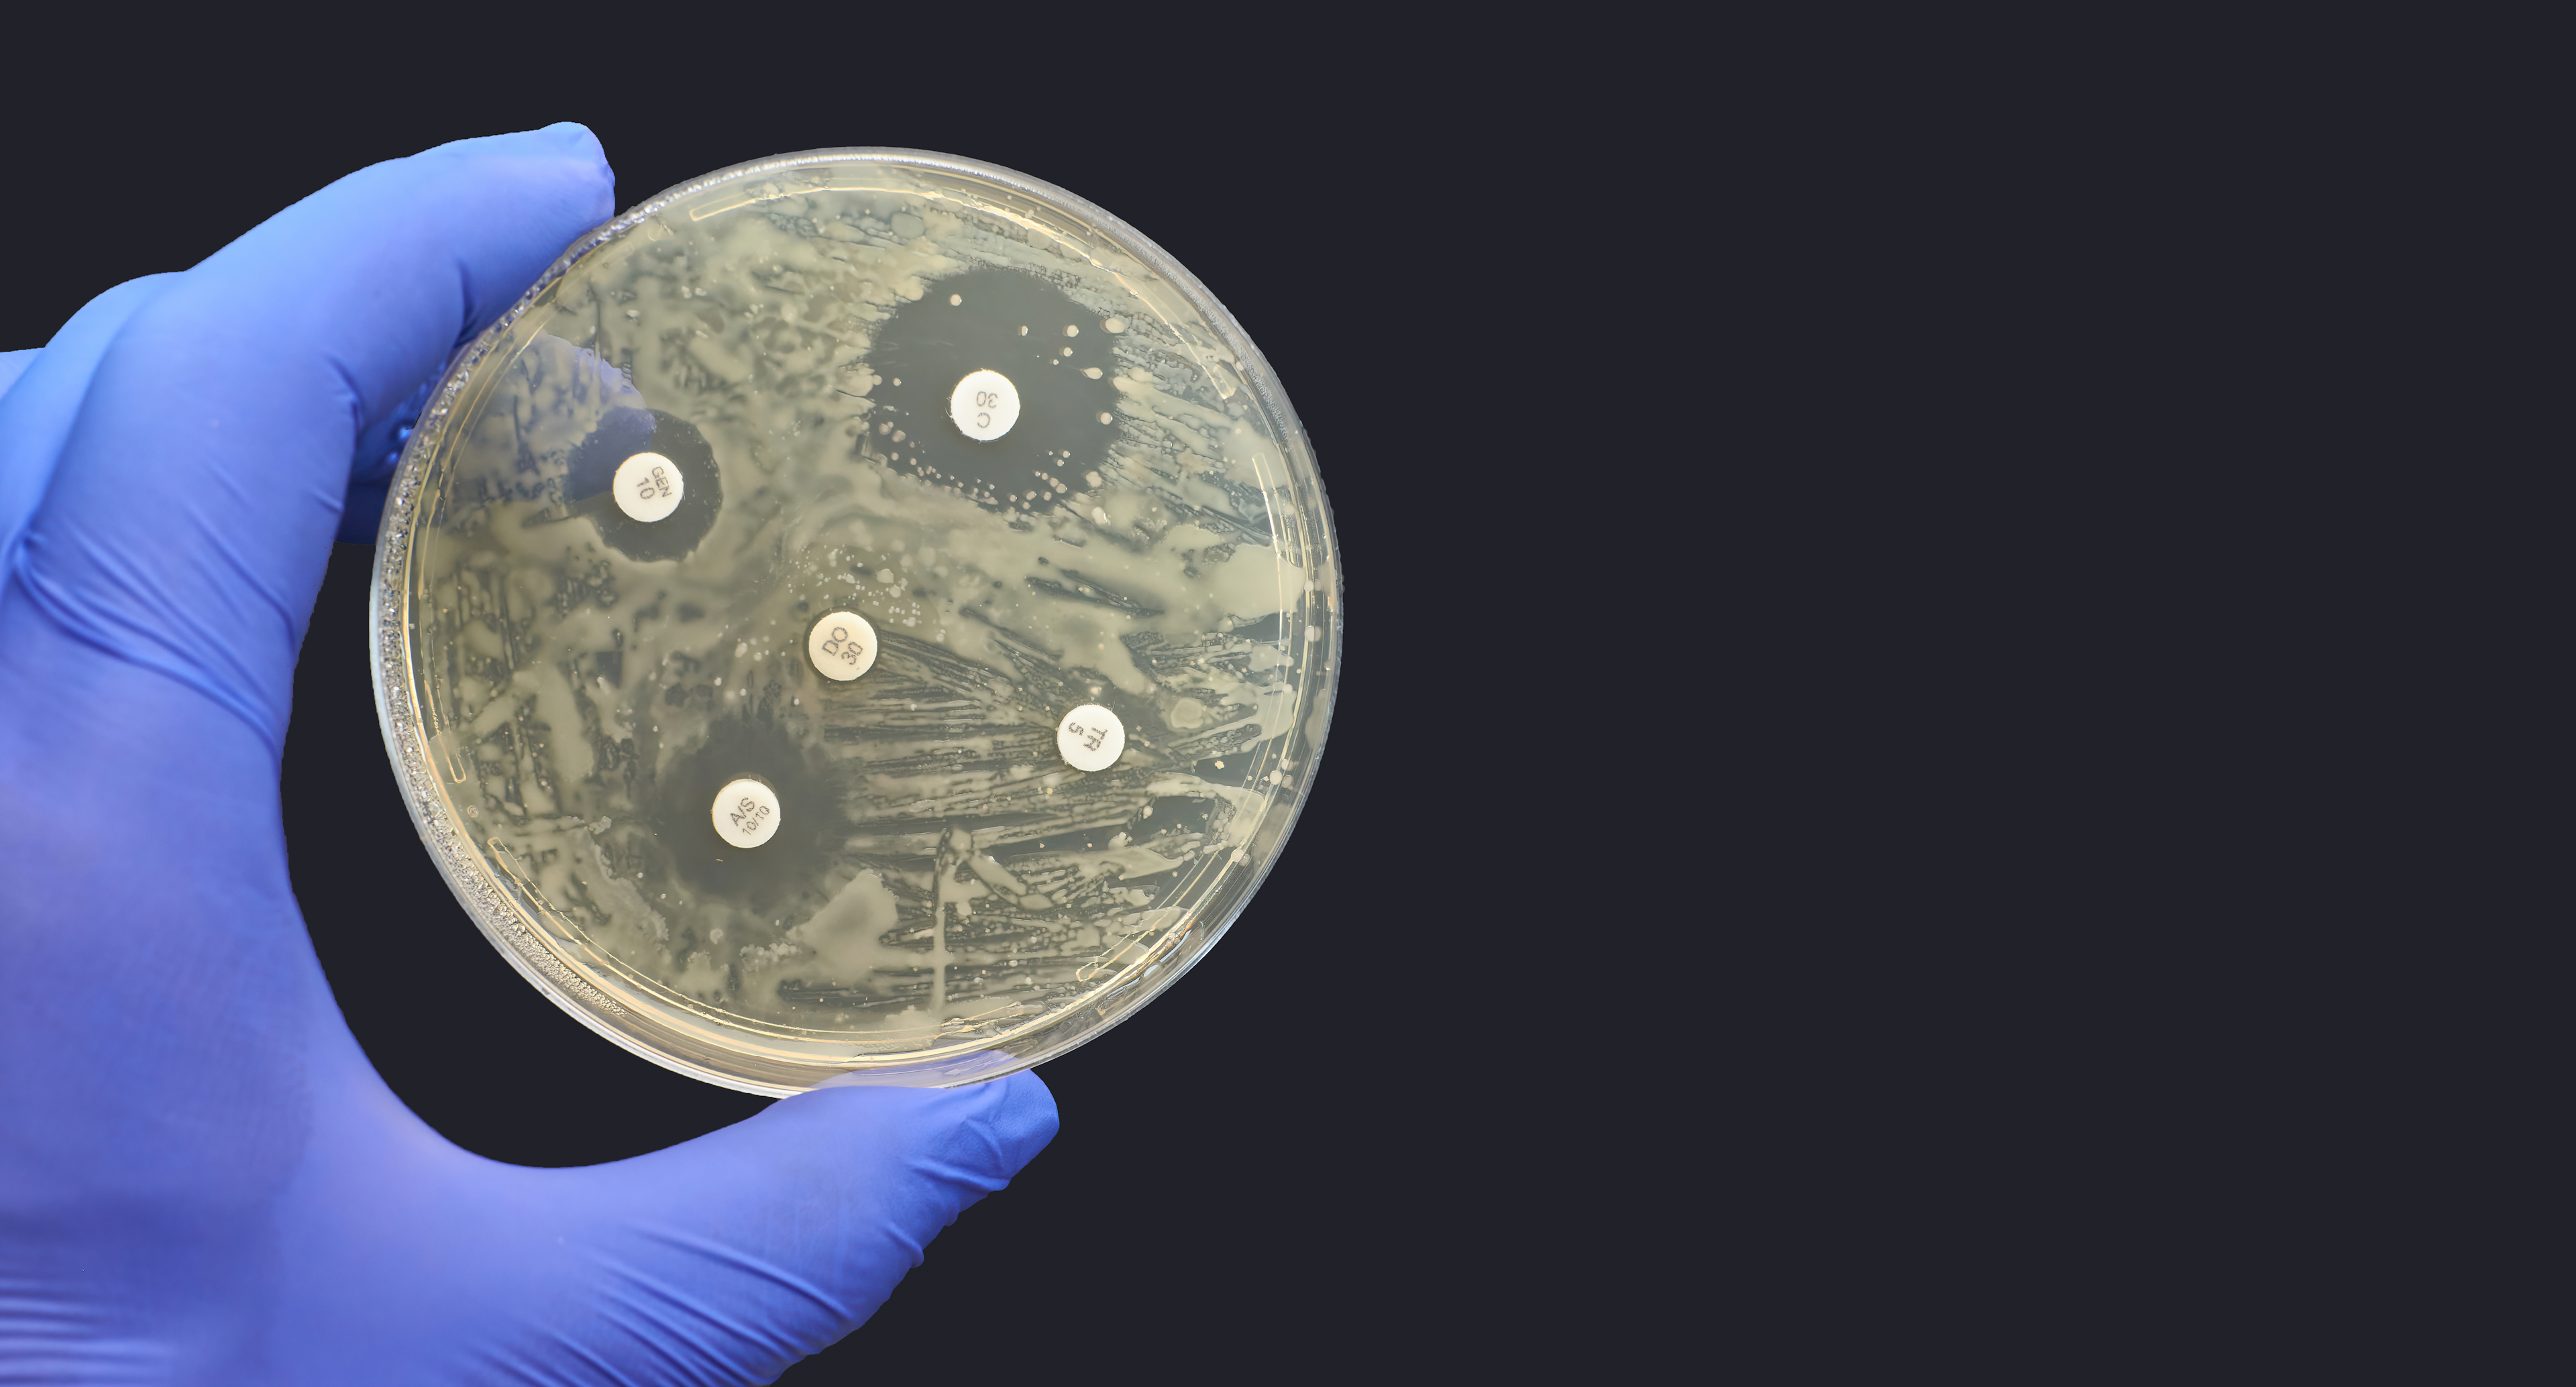 Kirby-Bauer Disk Diffusion Antimicrobial Susceptibility Test black background | © Nicolae Adobe Stock Image